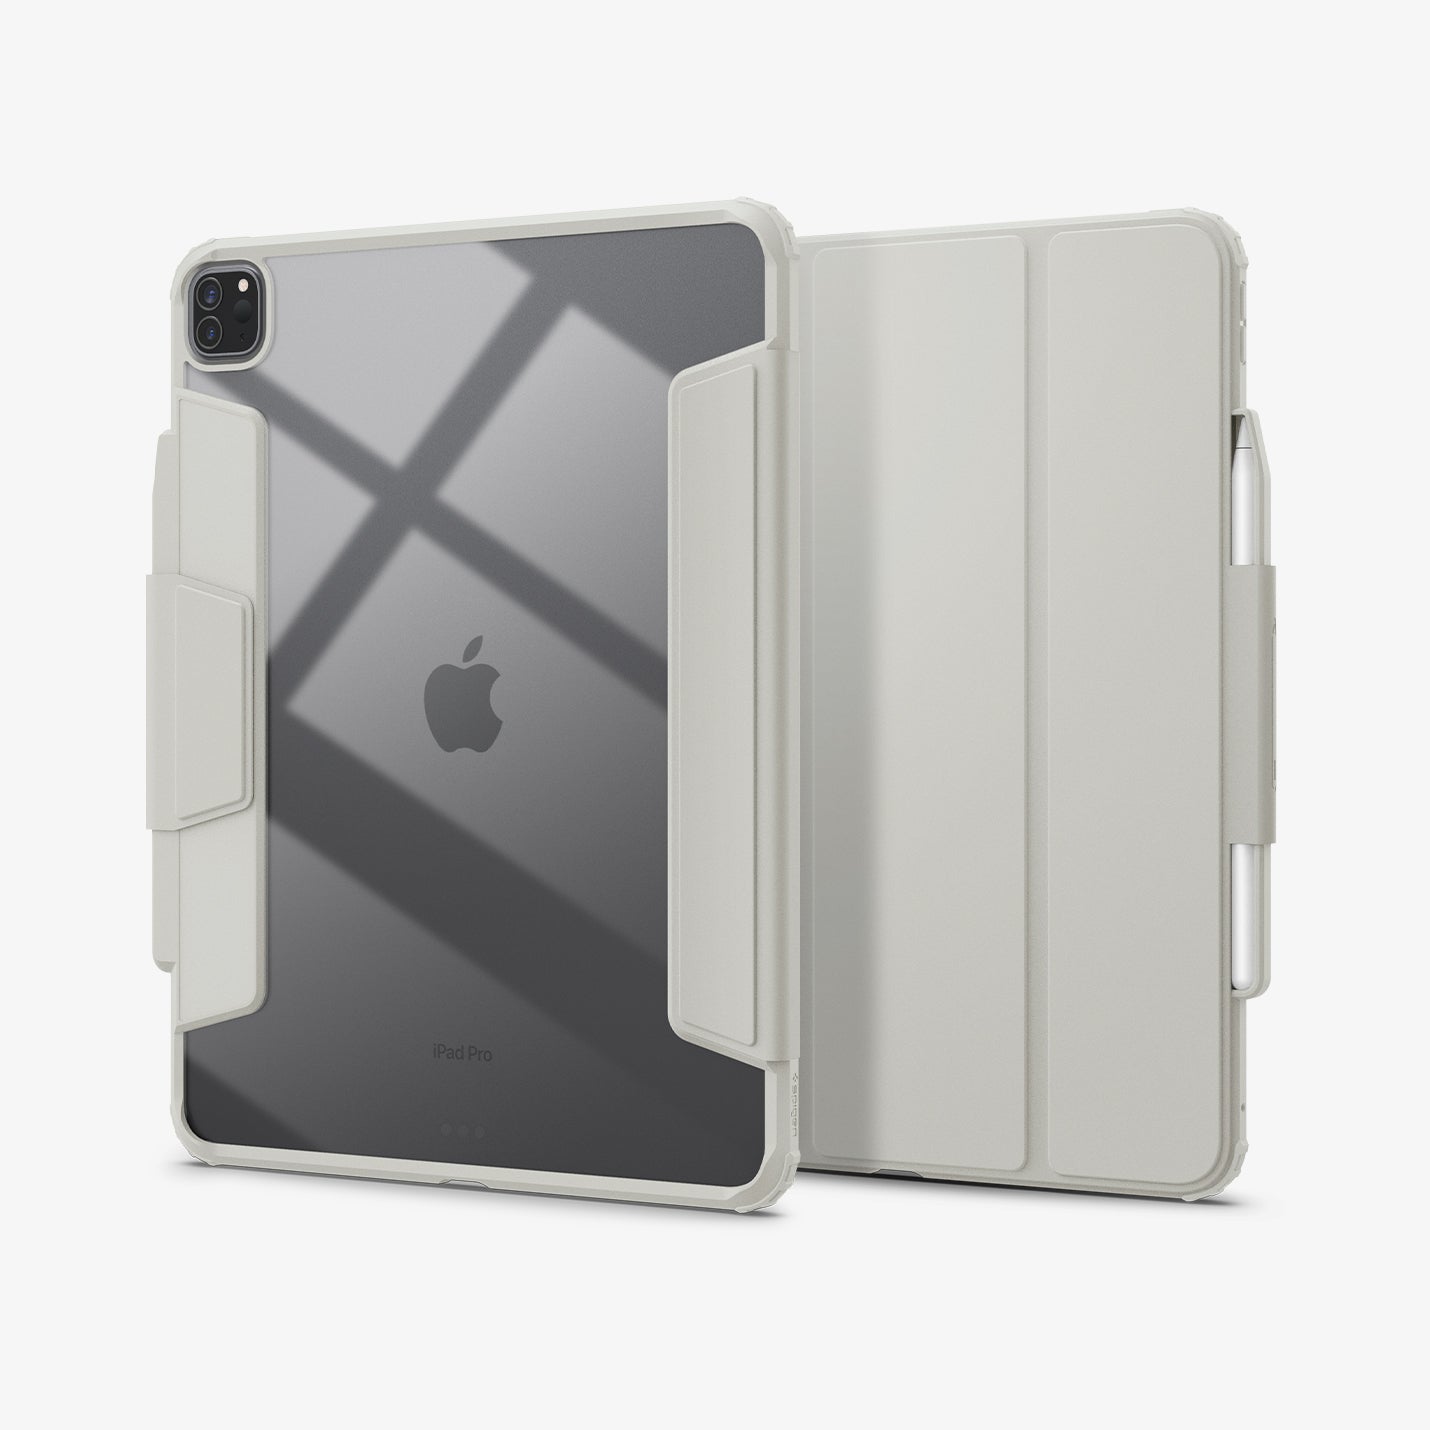 ACS07014 - iPad Pro 12.9-inch Case Air Skin Pro in Gray showing the back and front